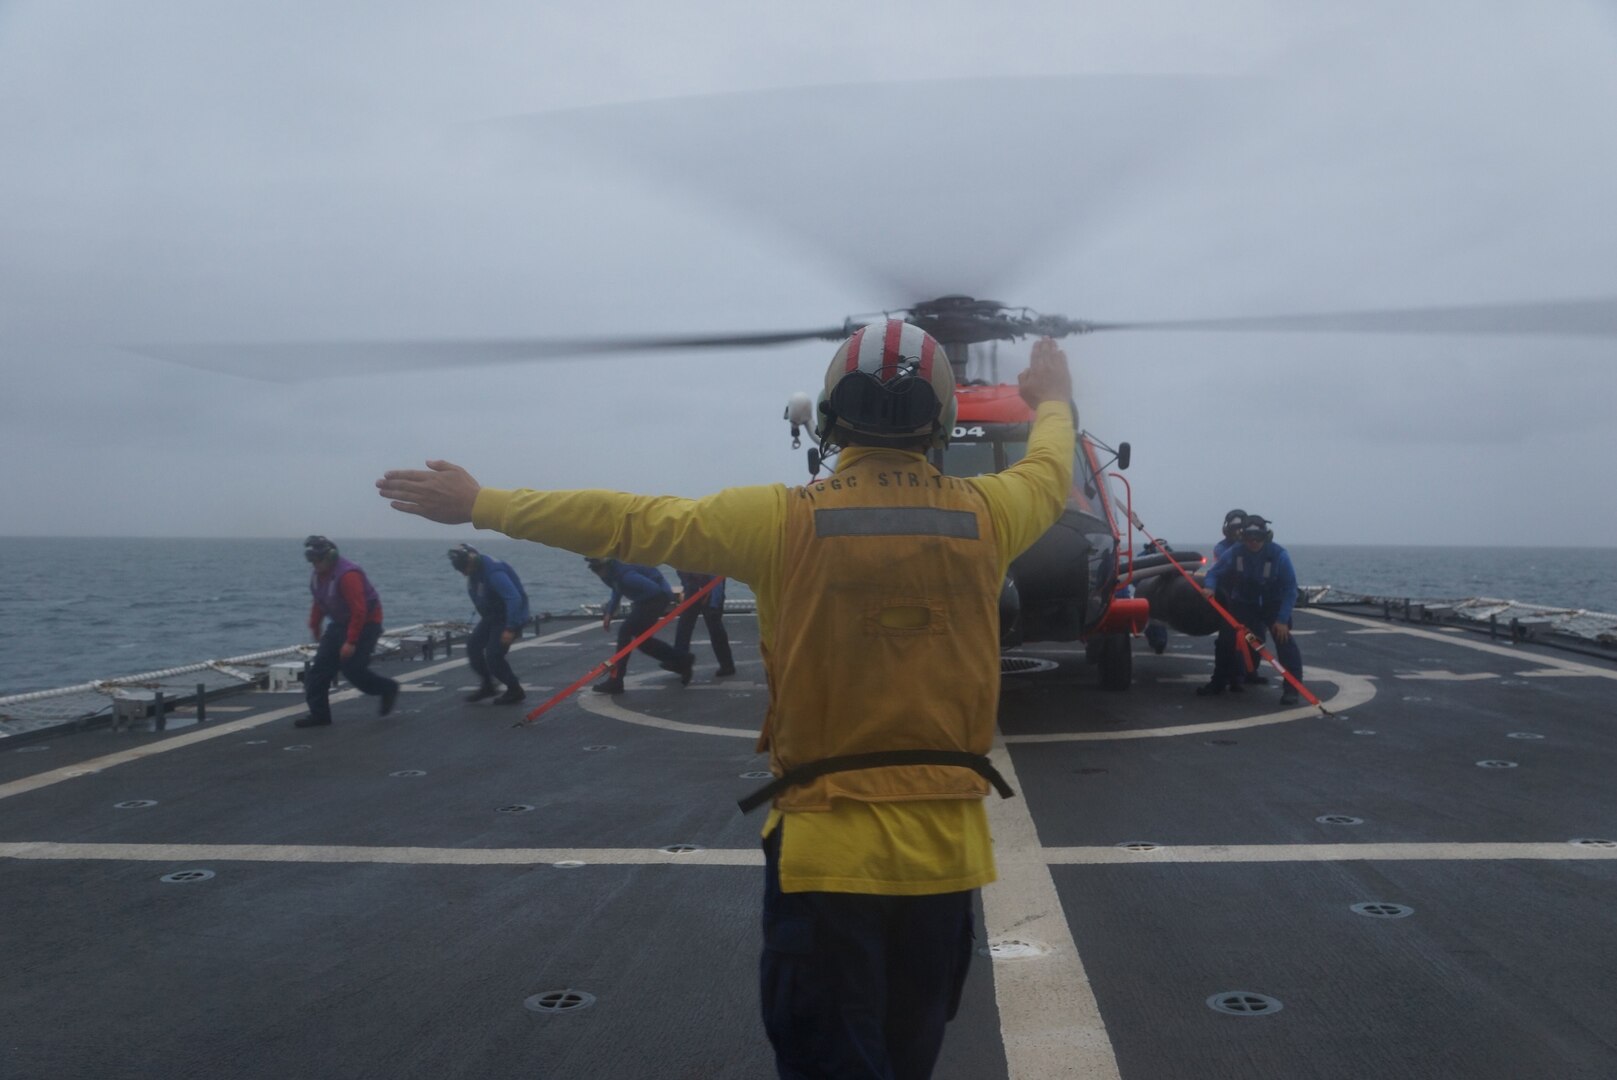 A Coast Guard Ensign signals the crew of a Coast Guard helicopter during a training
exercise on the U.S. Coast Guard Cutter Stratton as part of Operation Arctic
Shield 2016. As part of Arctic Shield 2016, the Coast Guard will deploy
cutters, aircraft, and personnel to the region to engage in operations
encompassing a variety of Coast Guard missions across the North Slope. (U.S.
Coast Guard photo by Lt.j.g. Gina Caylor)
